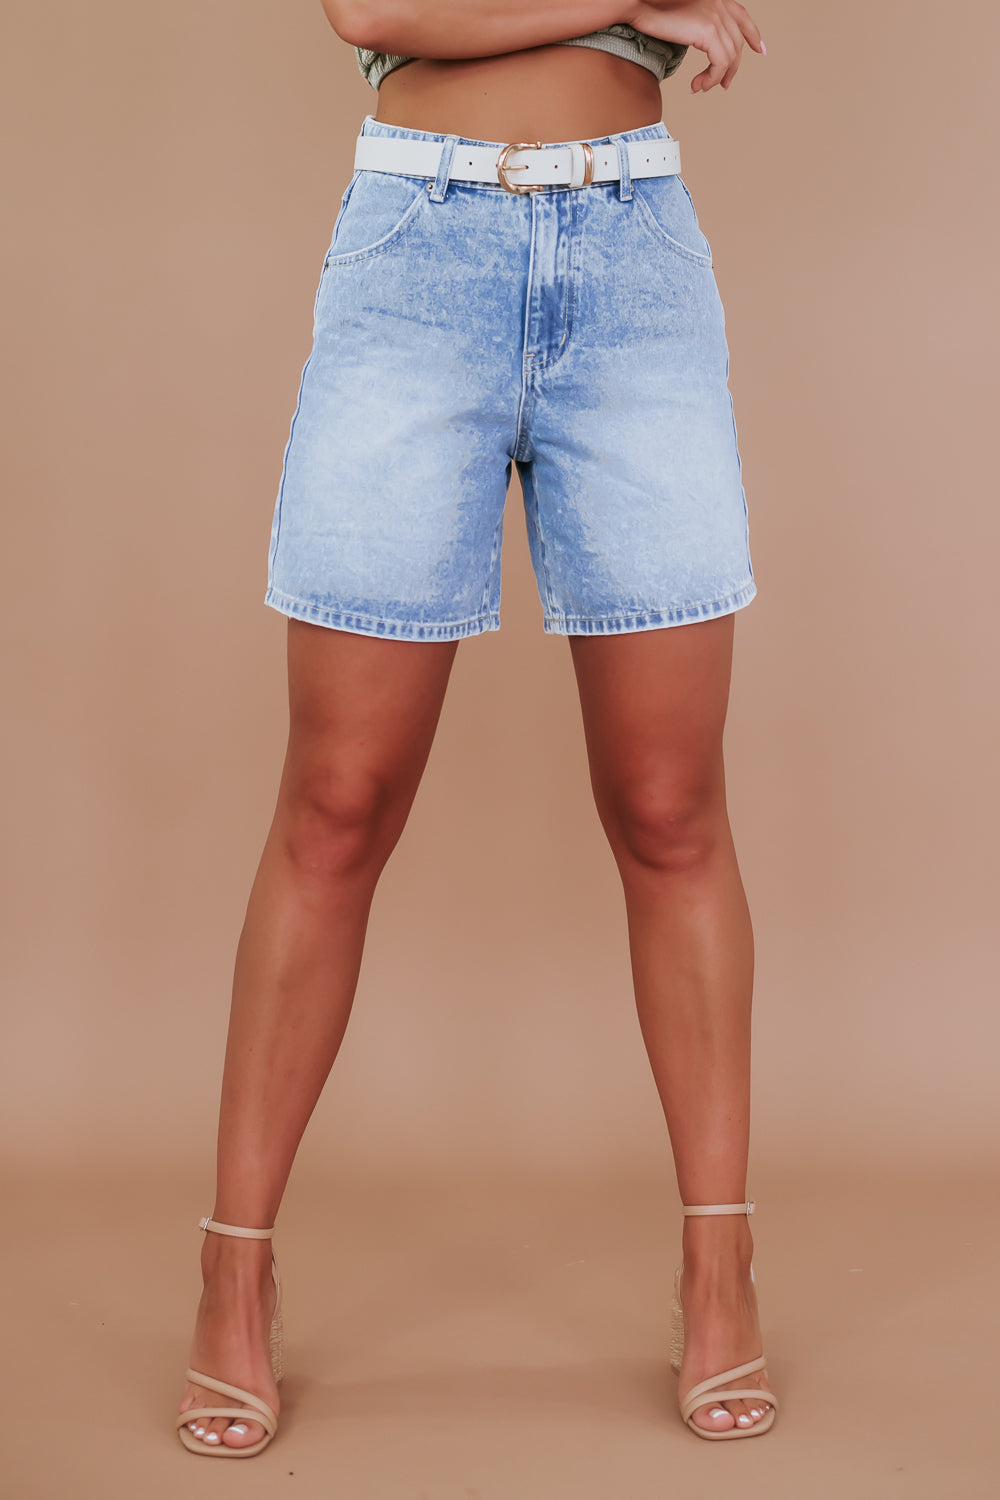 BY TOGETHER: Denim Jean Shorts